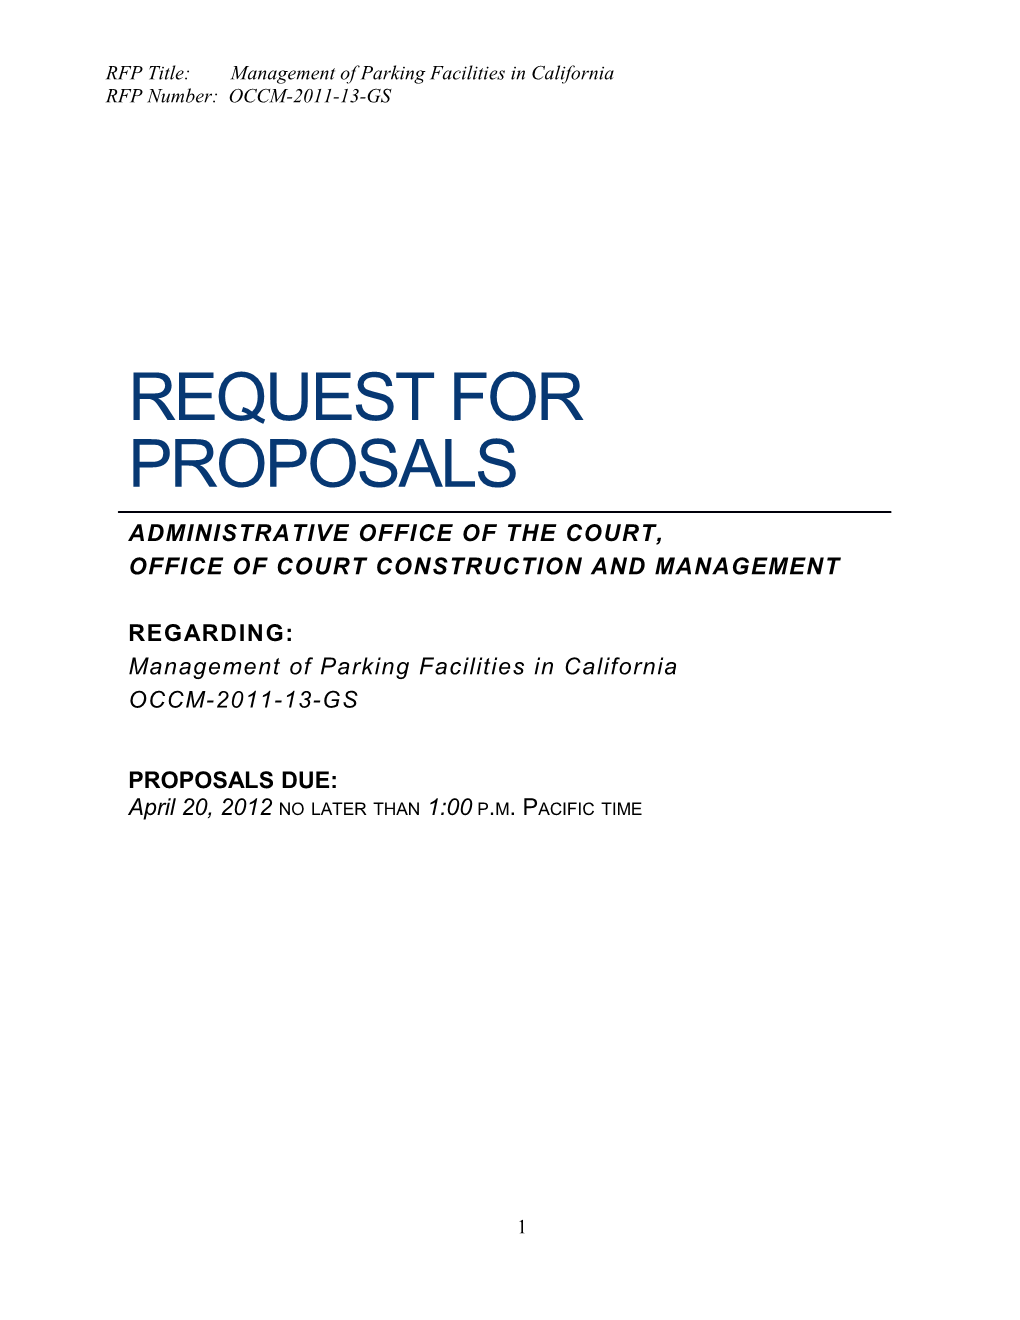 RFP Title: Management of Parking Facilities in California